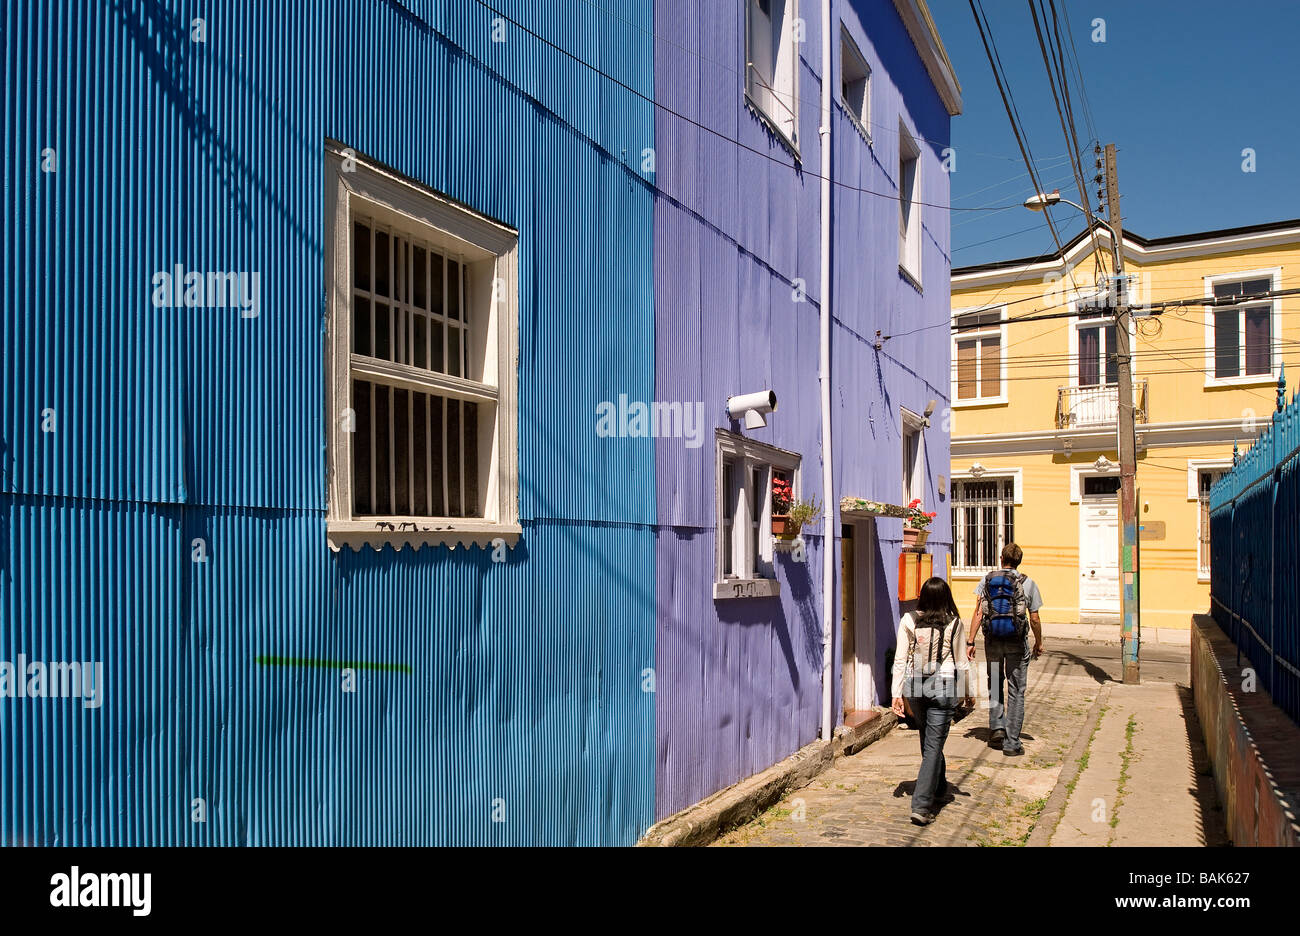 Chile, Valparaiso Region, Valparaiso, historic district listed as World Heritage by UNESCO, Cerro Conception, iron sheet houses Stock Photo